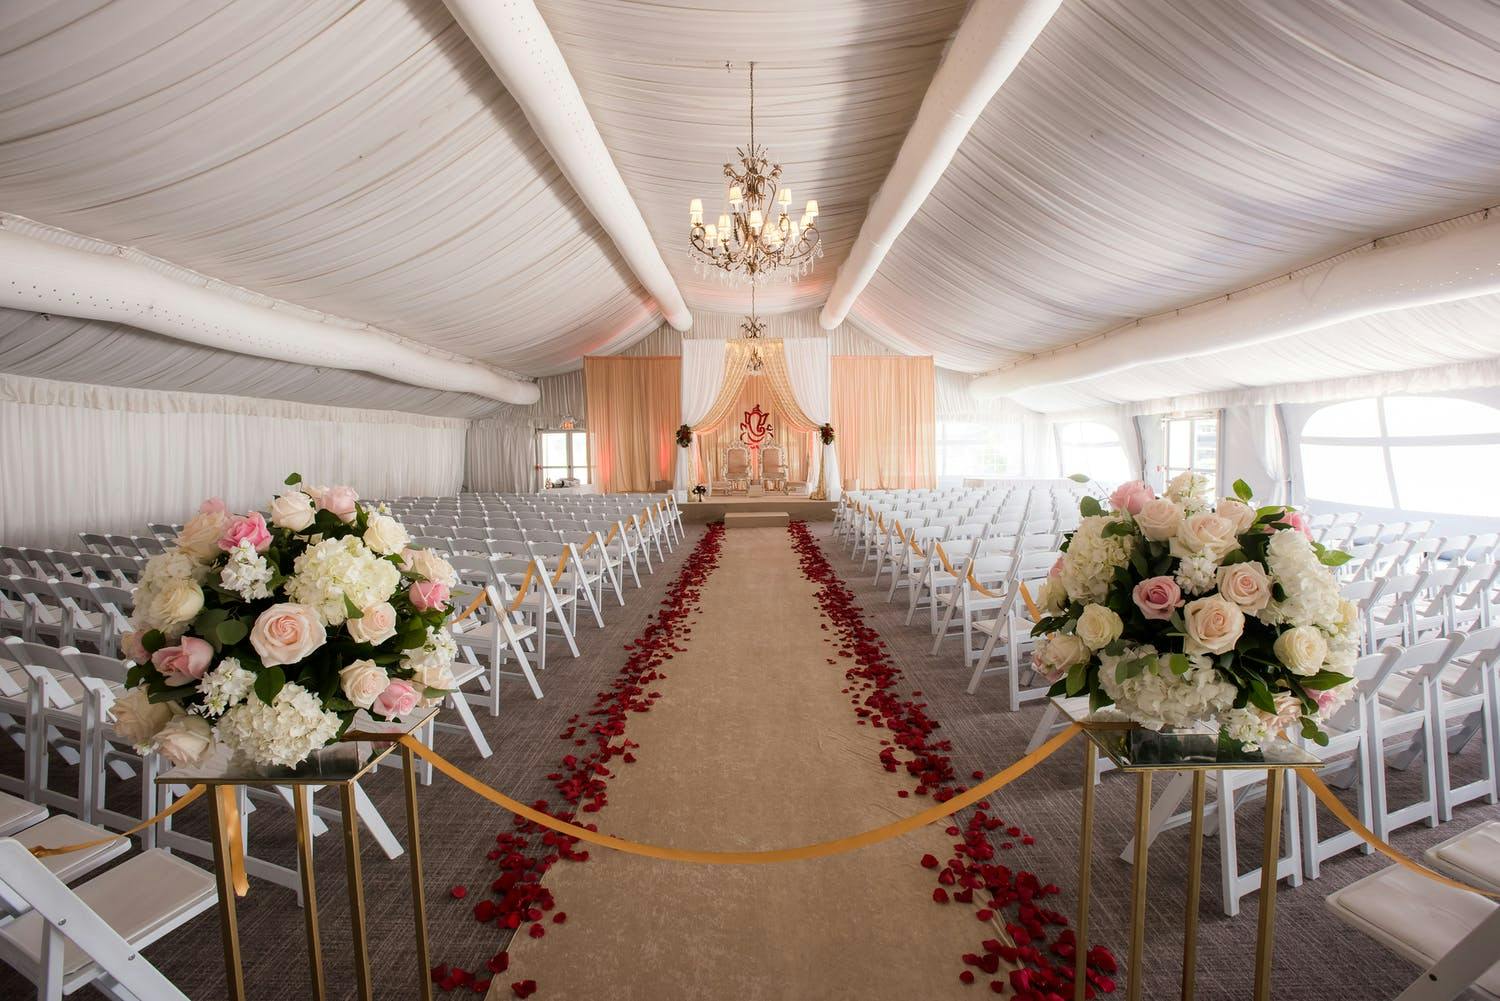 Mandap With Ethereal Gold Fabric and Floral Wall Accent | PartySlate